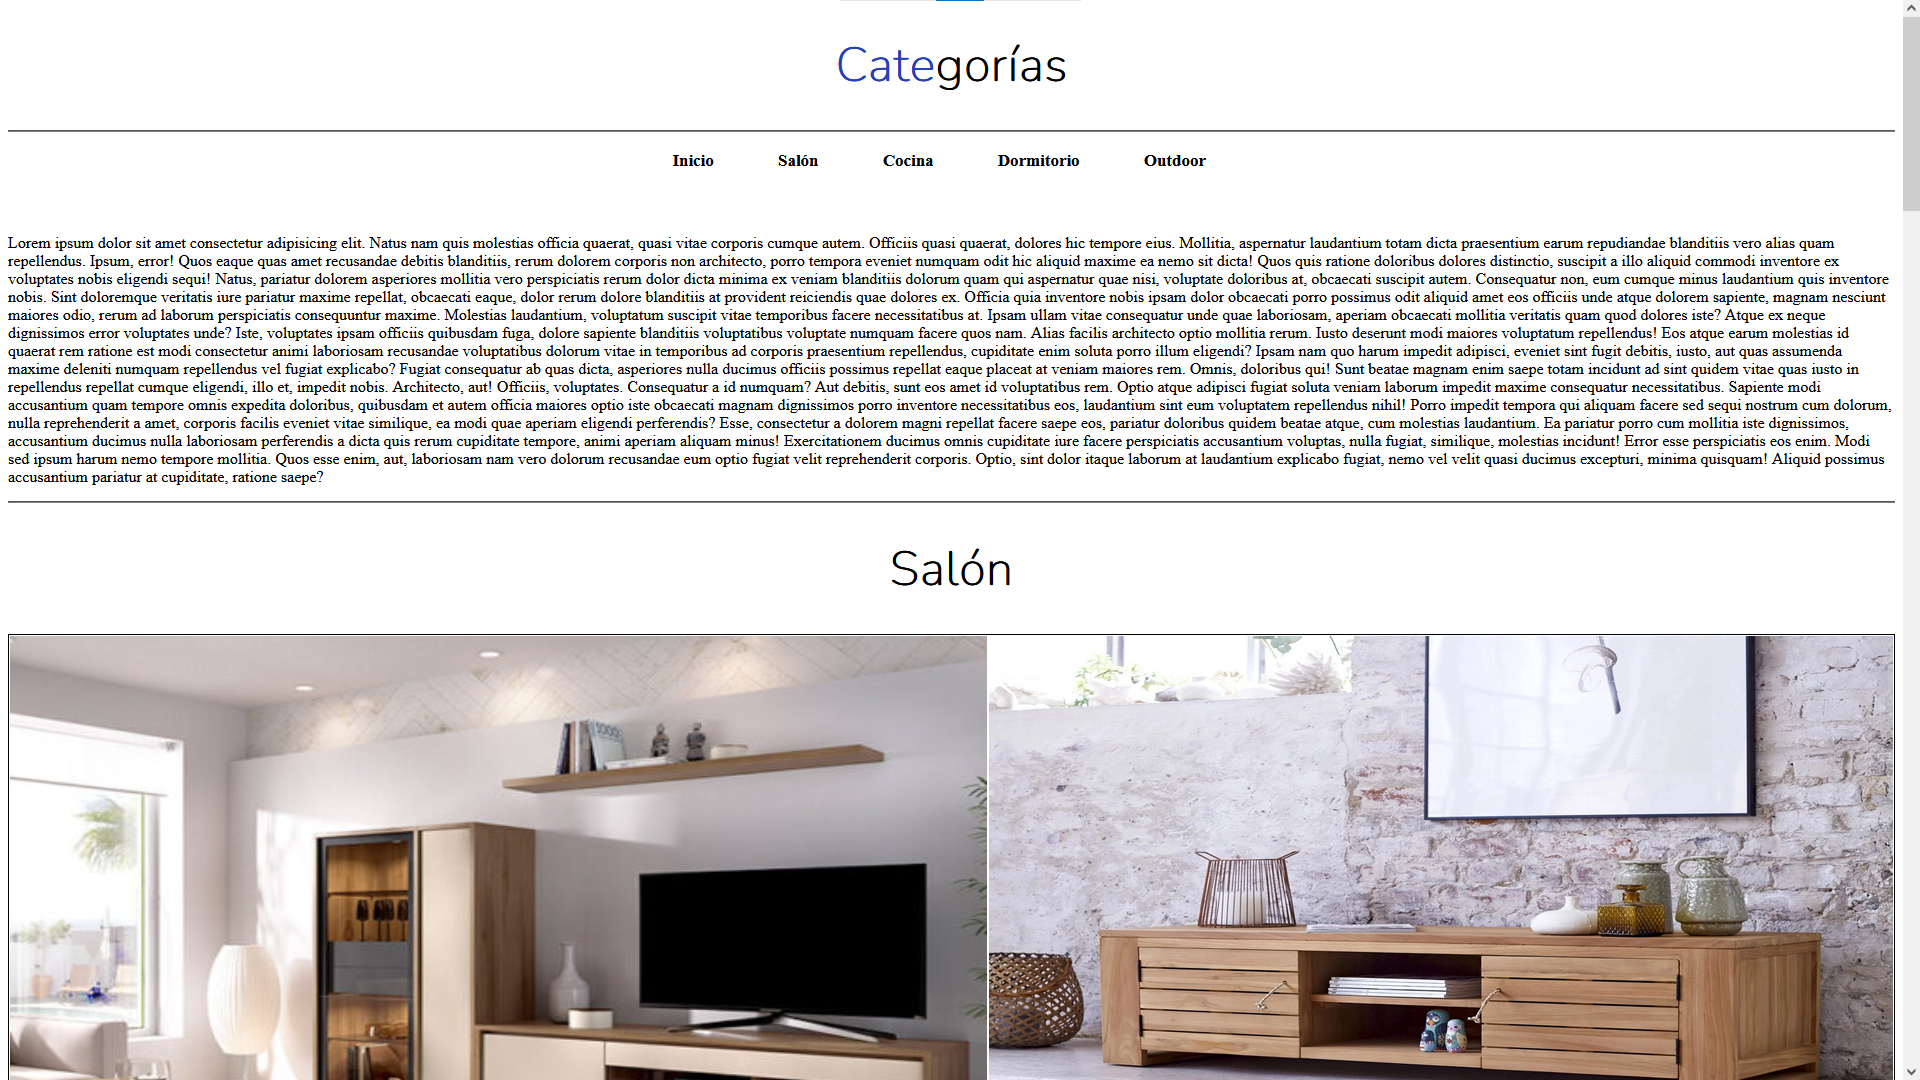 categories page